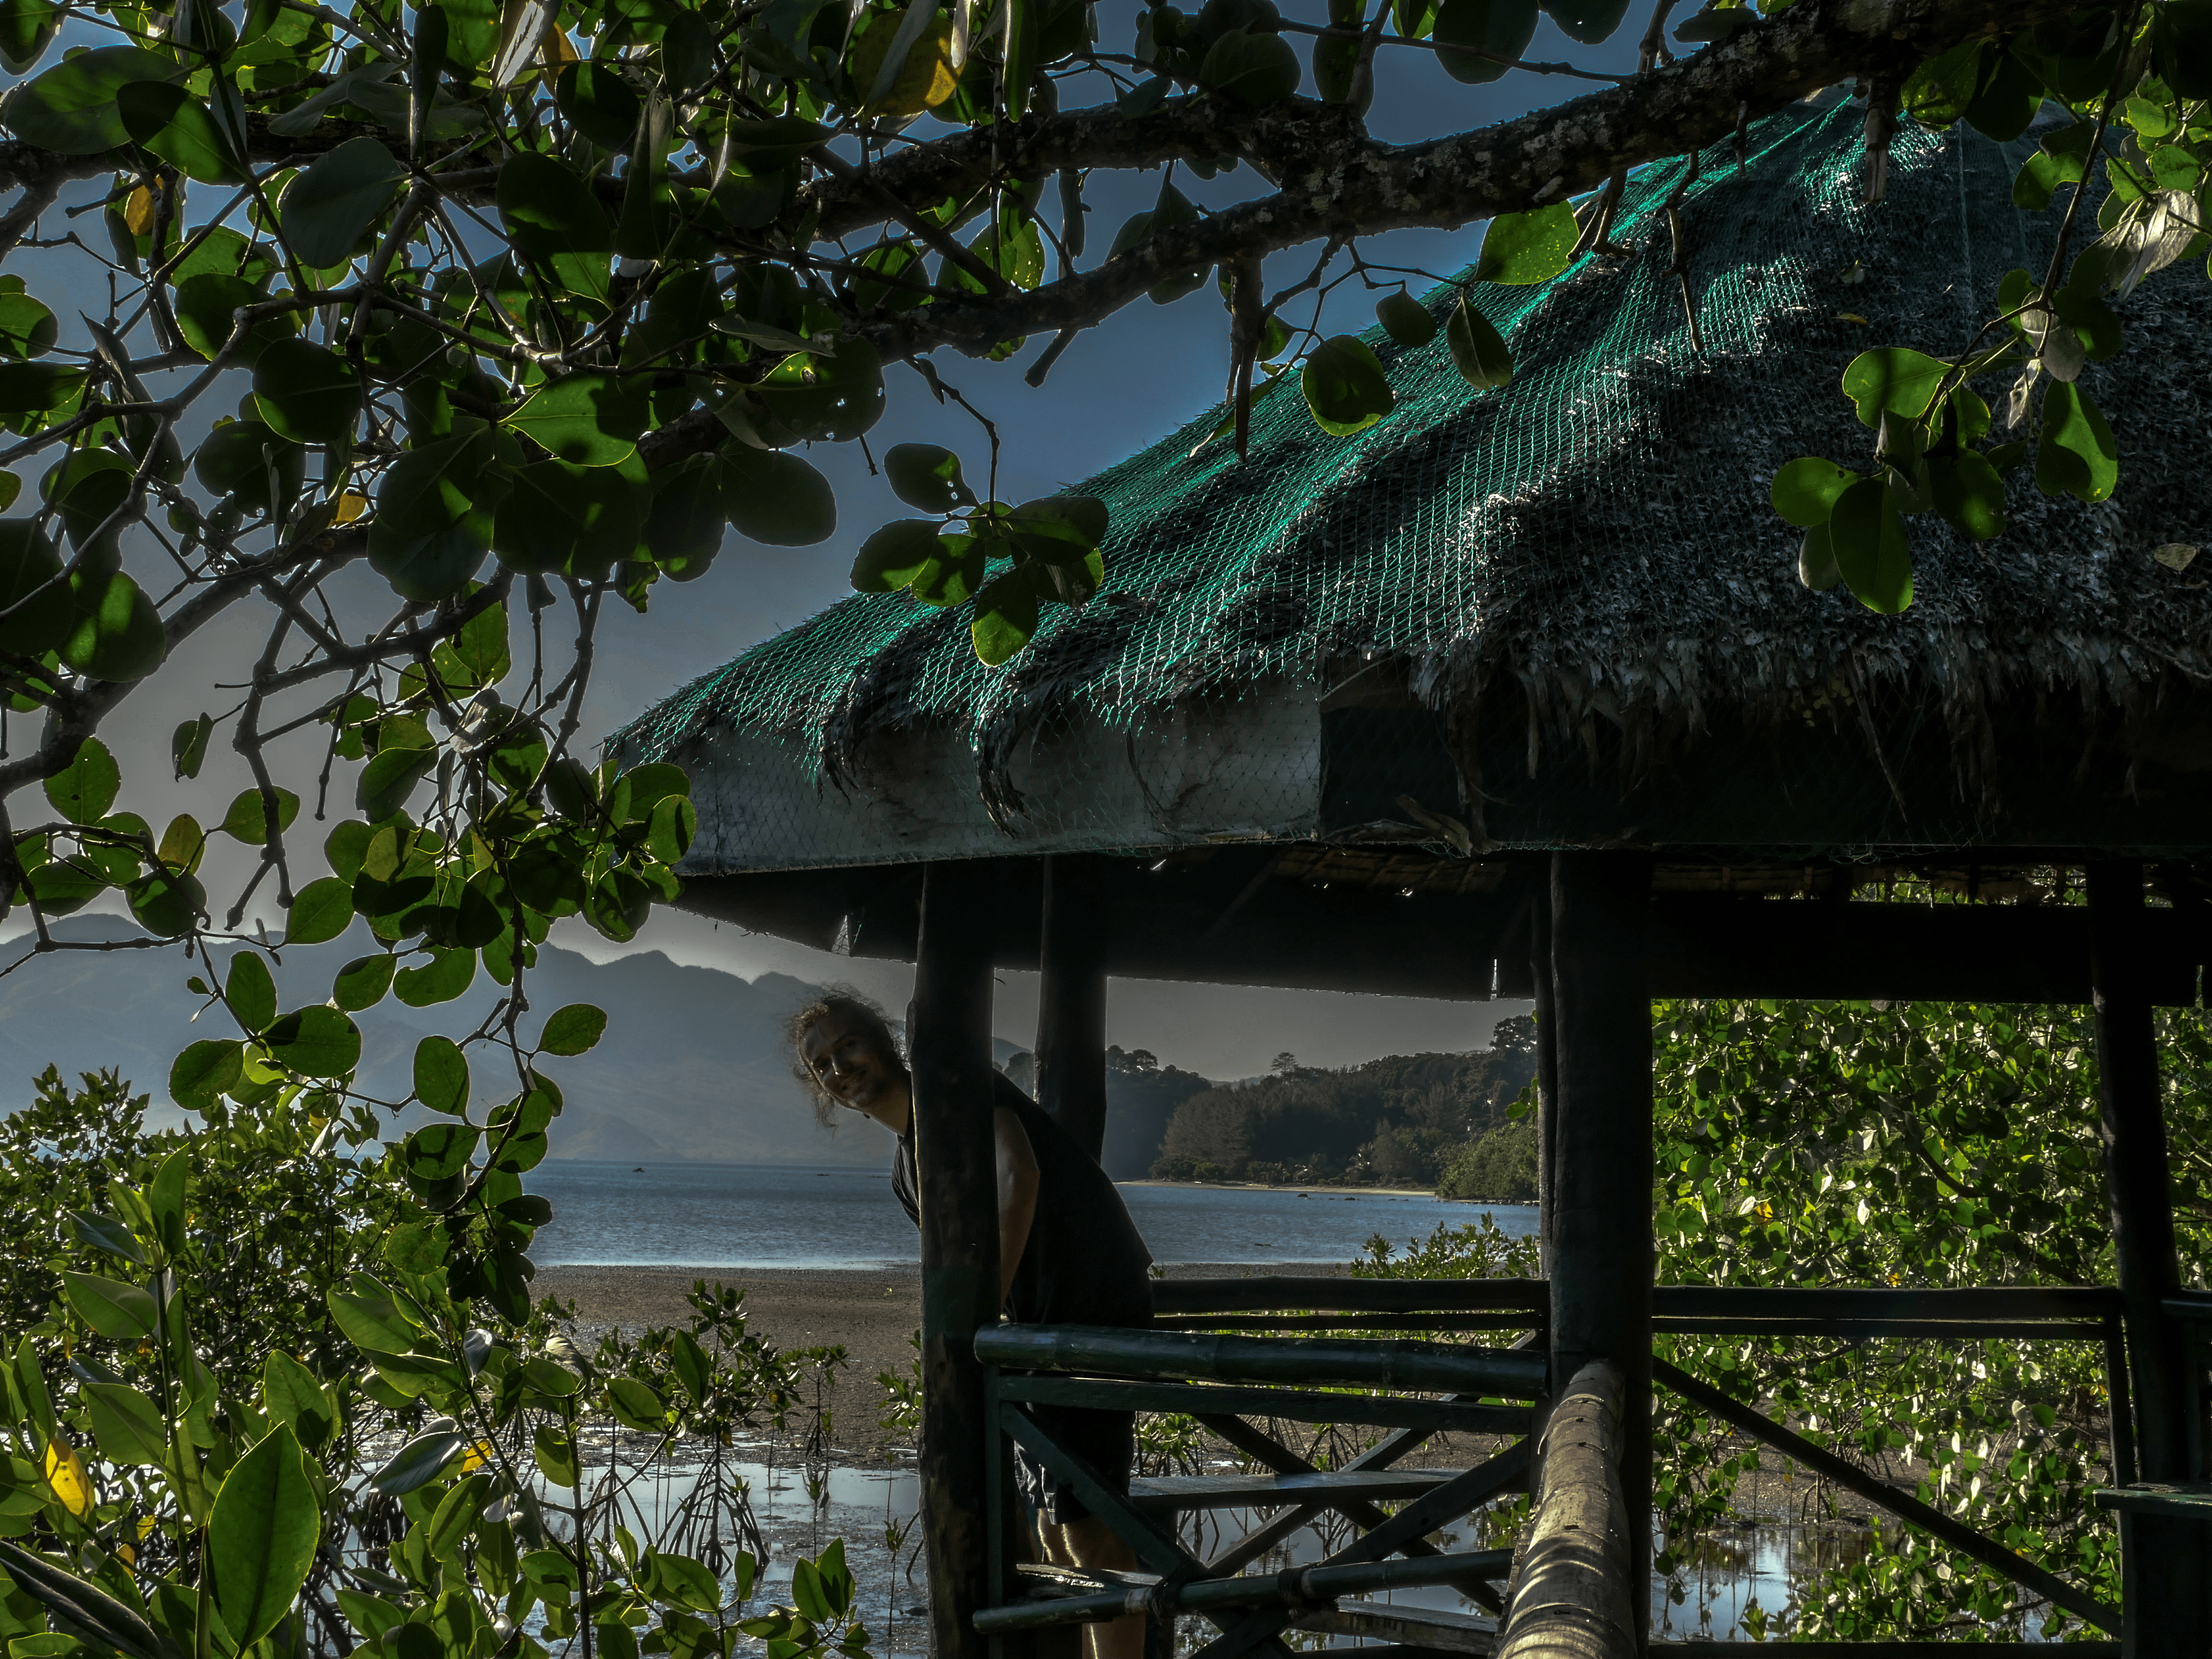 lenny through paradise smiling in little hut in triboa bay mangrove park in subic zambales philippines